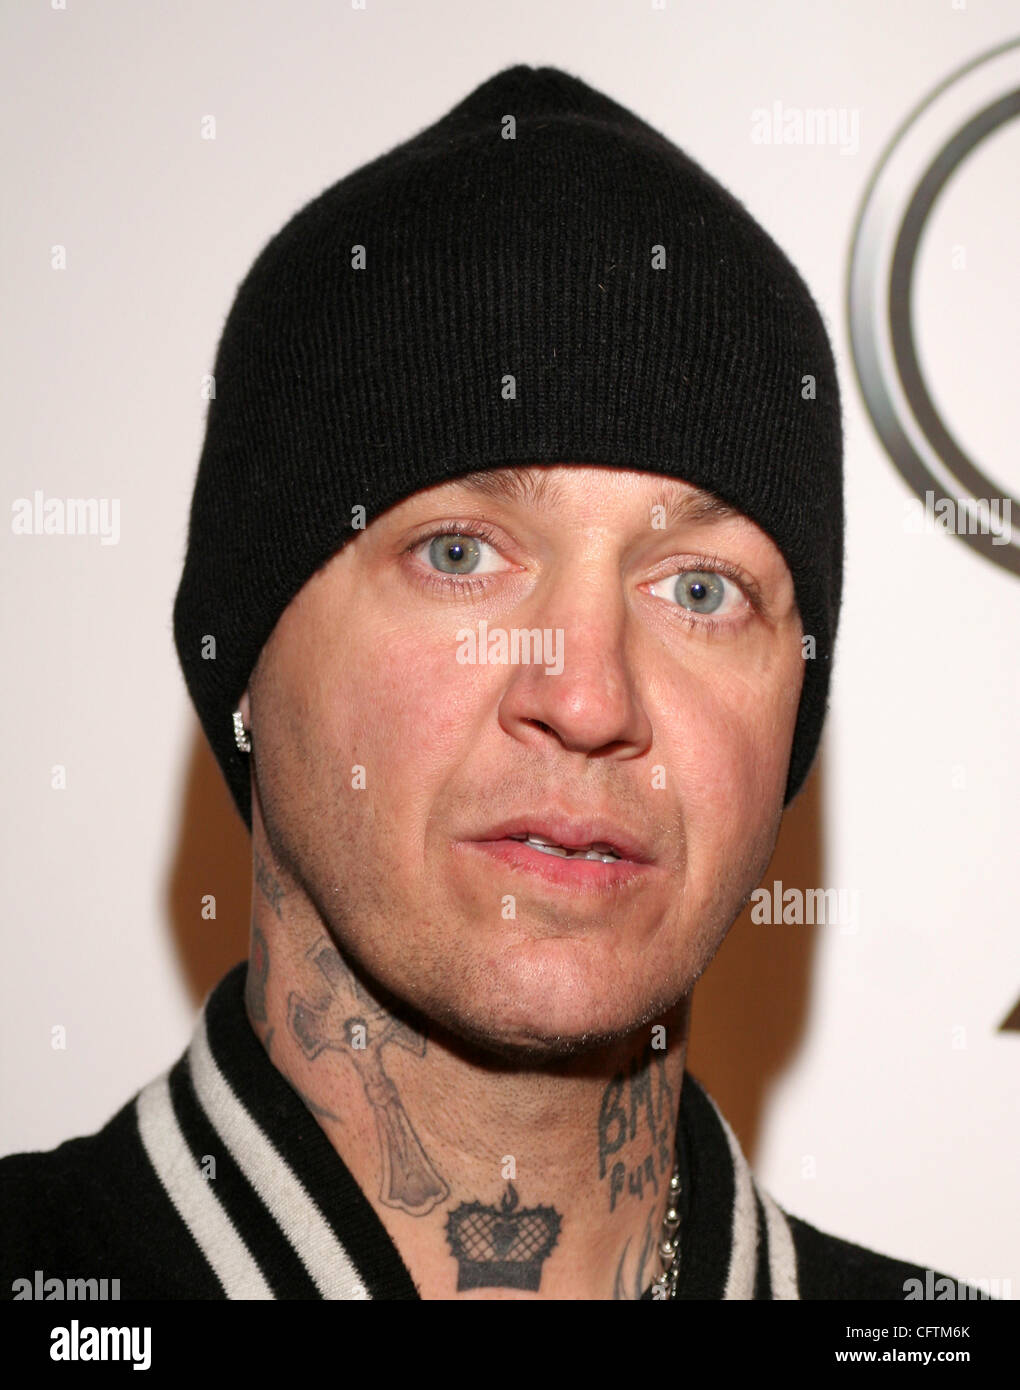 Jan 17, 2007; Hollywood, CA, USA; Famous Brand Pro Rider RICK THORNE arriving at BPM Magazine's MySpace LA Issue Release Party held at club Element in Los Angeles. Mandatory Credit: Photo by Camilla Zenz/ZUMA Press. (©) Copyright 2007 by Camilla Zenz Stock Photo